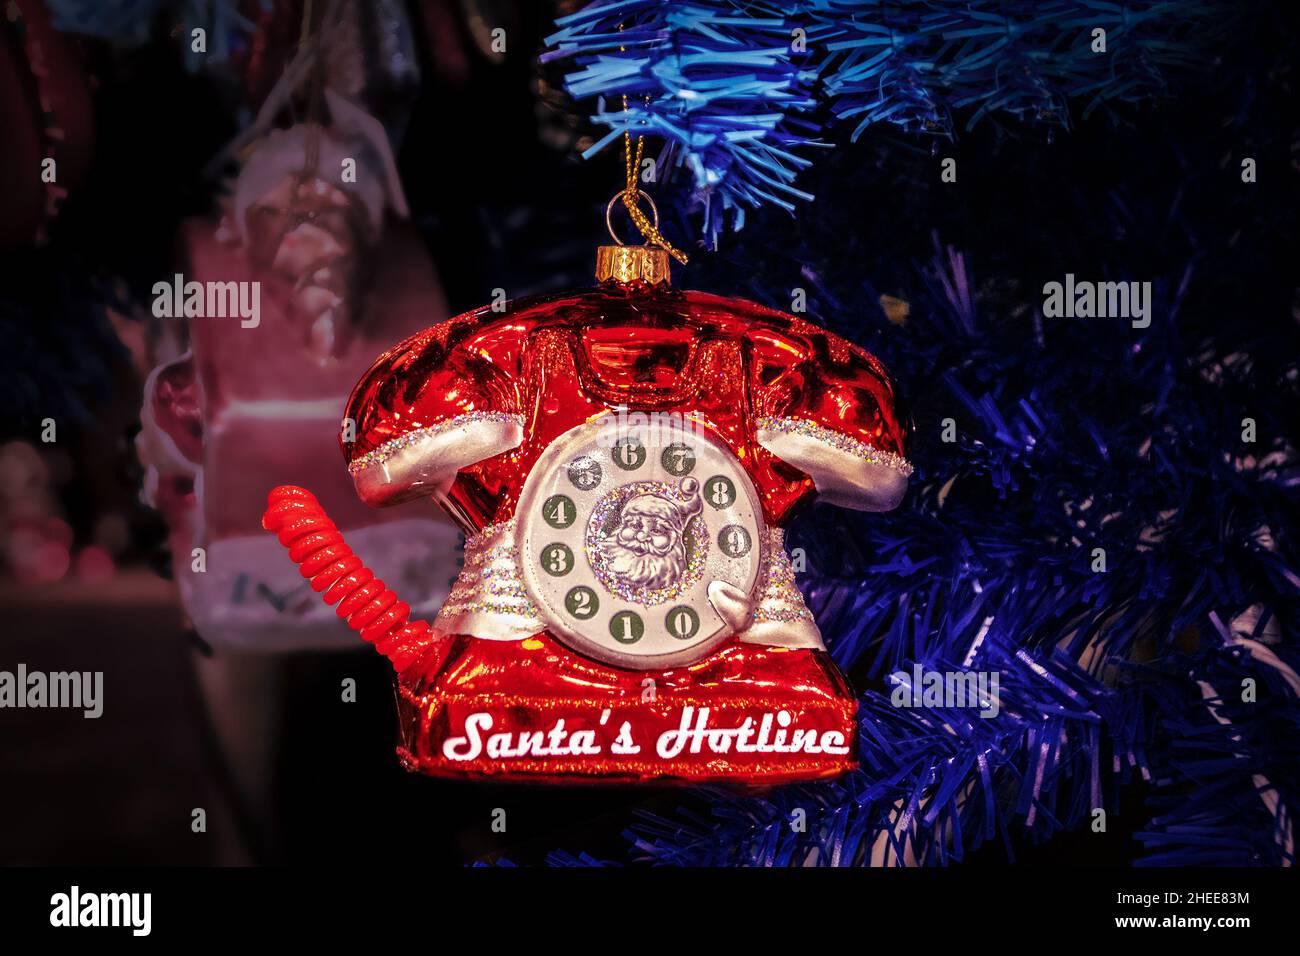 Santas Hotline red retro telephone ornament hanging on blue Christmas tree - Closeup and glittery on dark blurred background- Room for copy Stock Photo